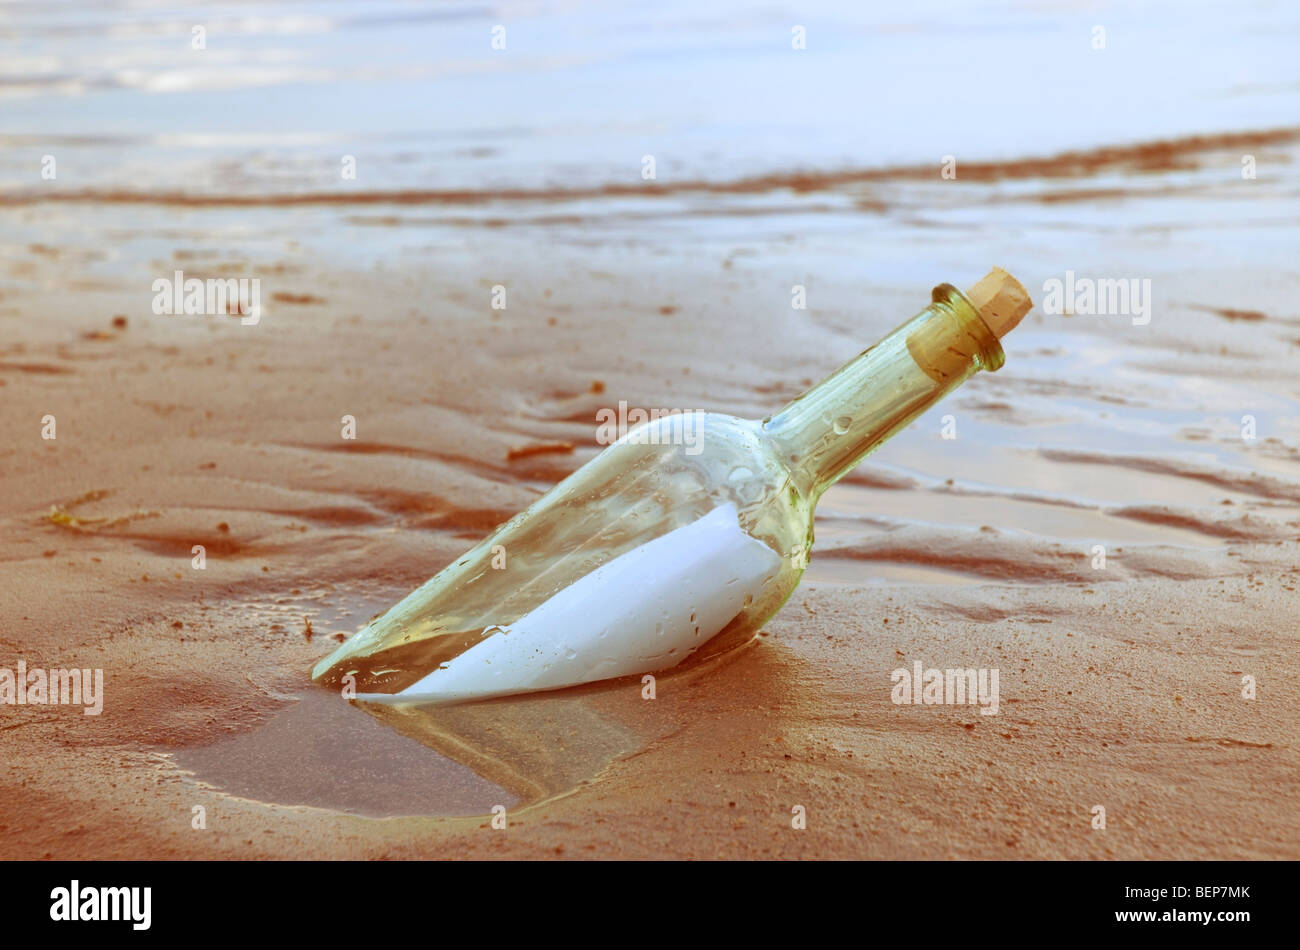 Bottle with a message washed up on a beach Stock Photo